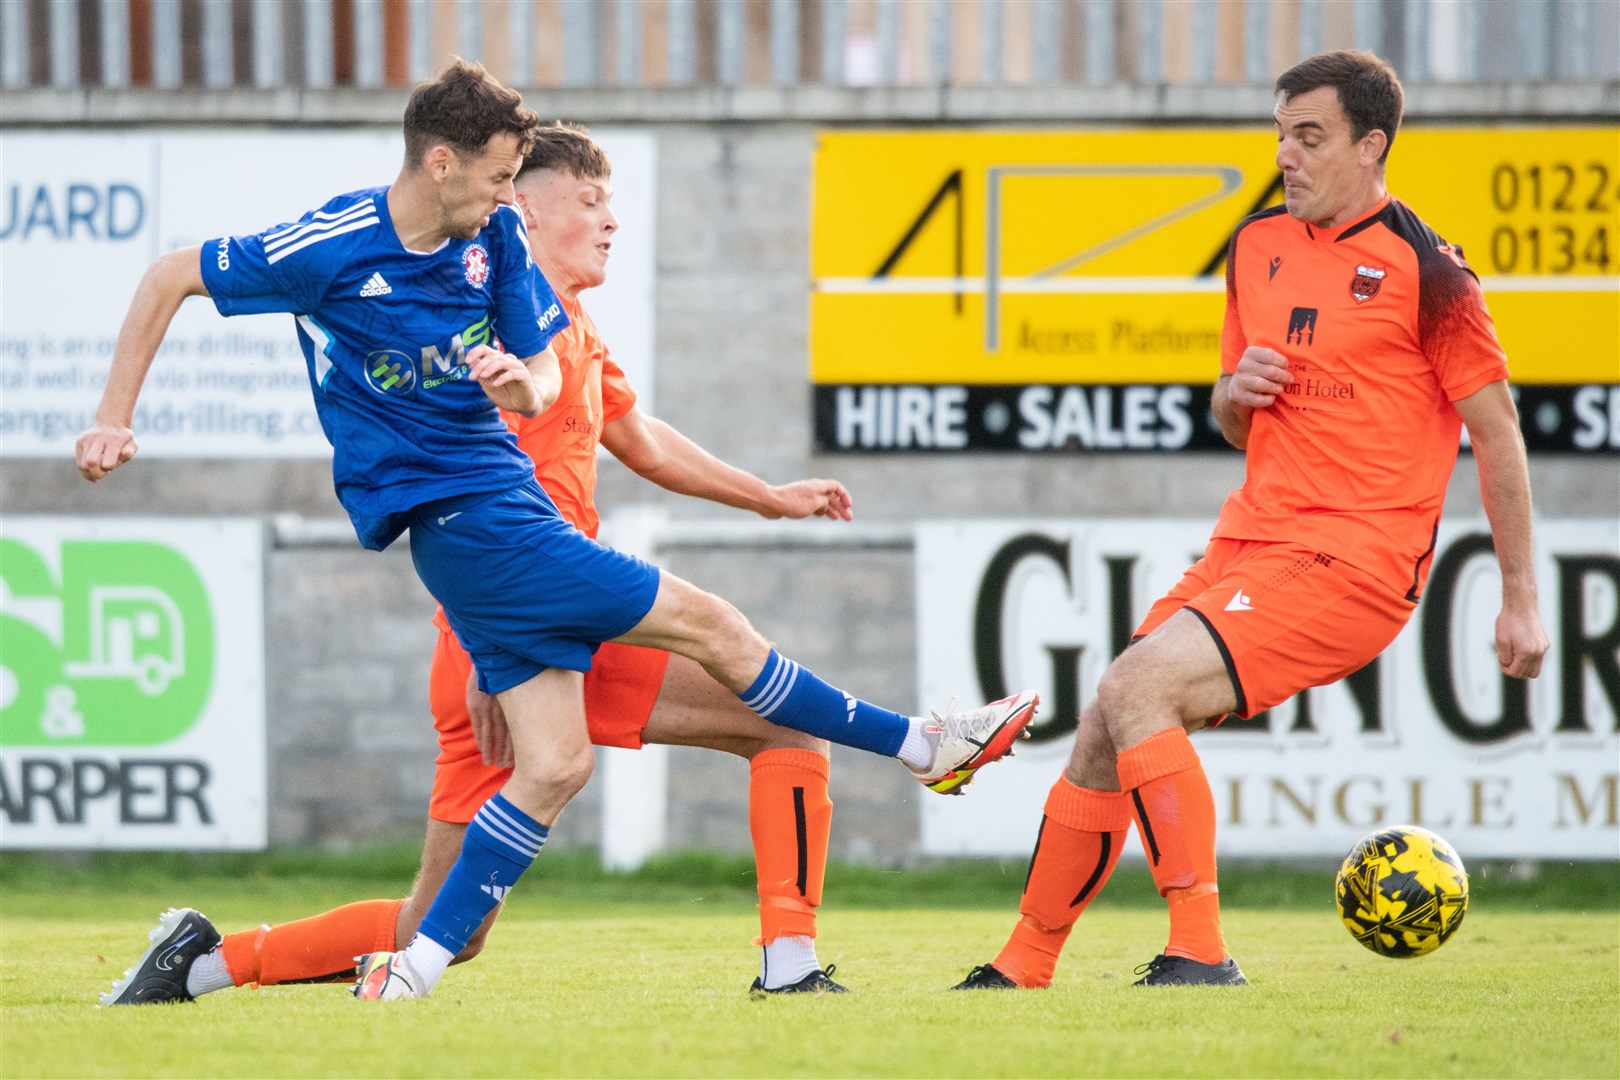 Lossie forward Ryan Farquhar takes a second half shot on goal. ..Rothes FC (1) vs Lossiemouth FC (0) - Highland Football League 23/24 - Mackessack Park, Rothes 16/09/2023...Picture: Daniel Forsyth..